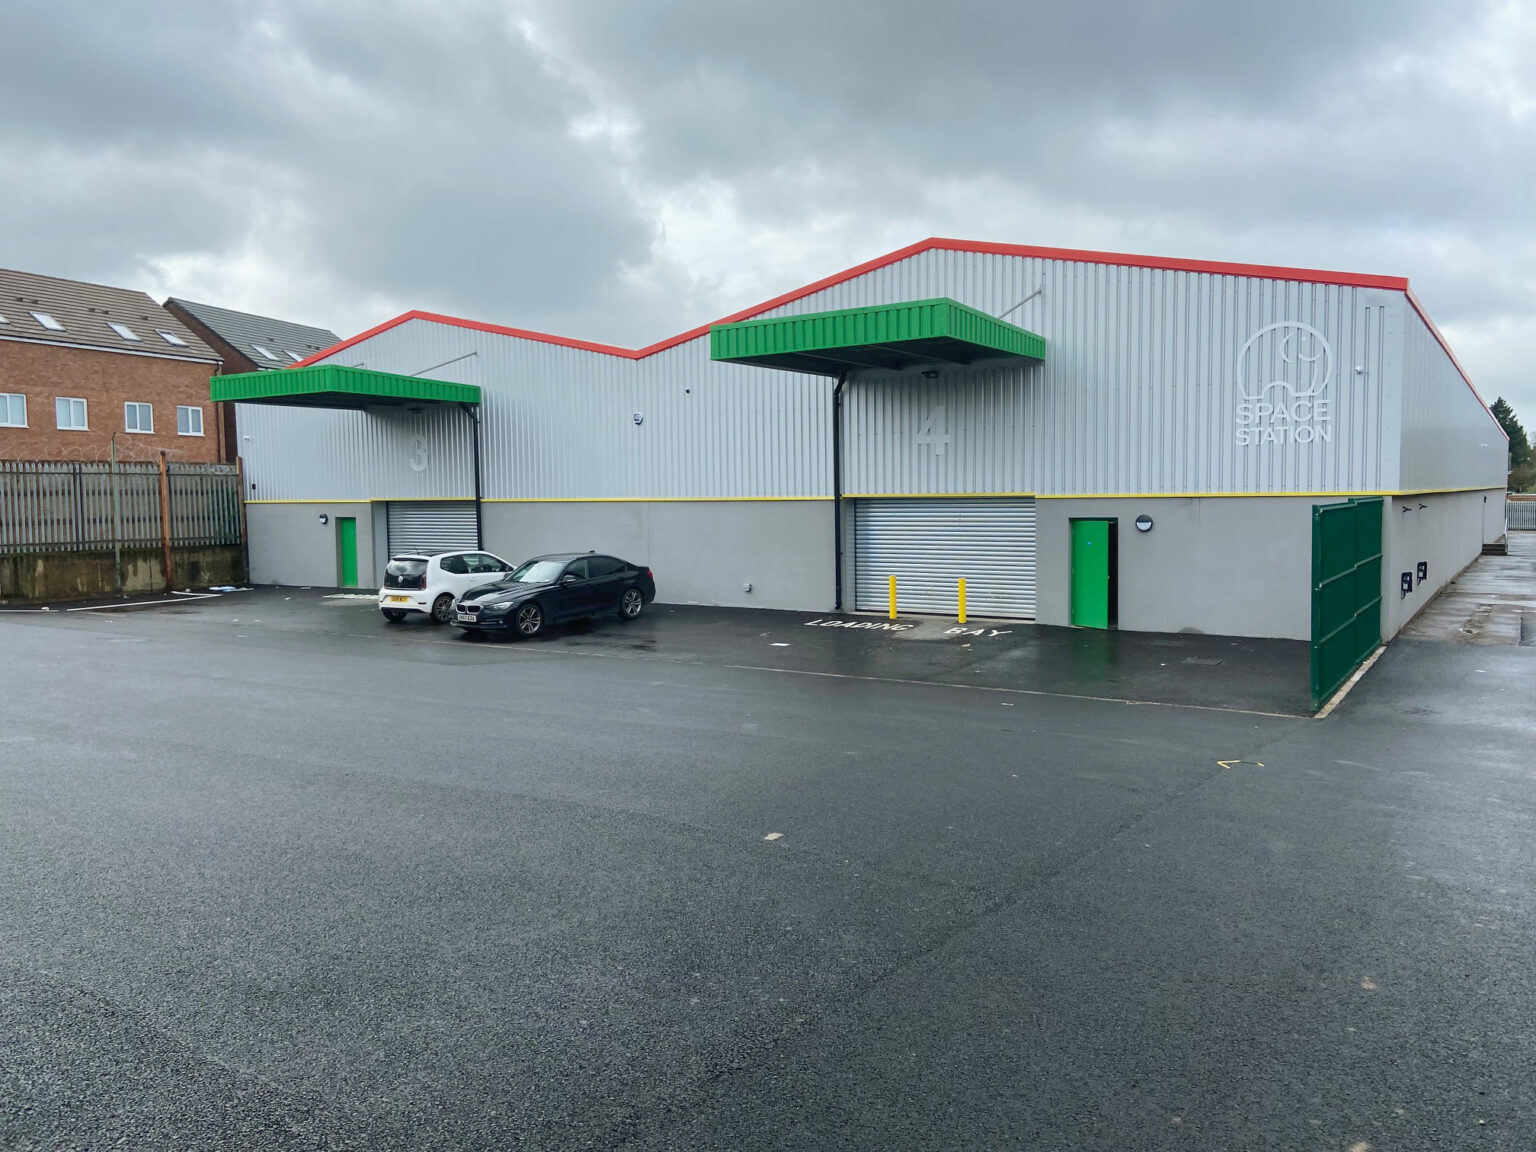 Unit 2 107 York Road, industrial/warehouse unit to rent, Hall Green on Stratford Road, high quality warehouse space to rent Birmingham